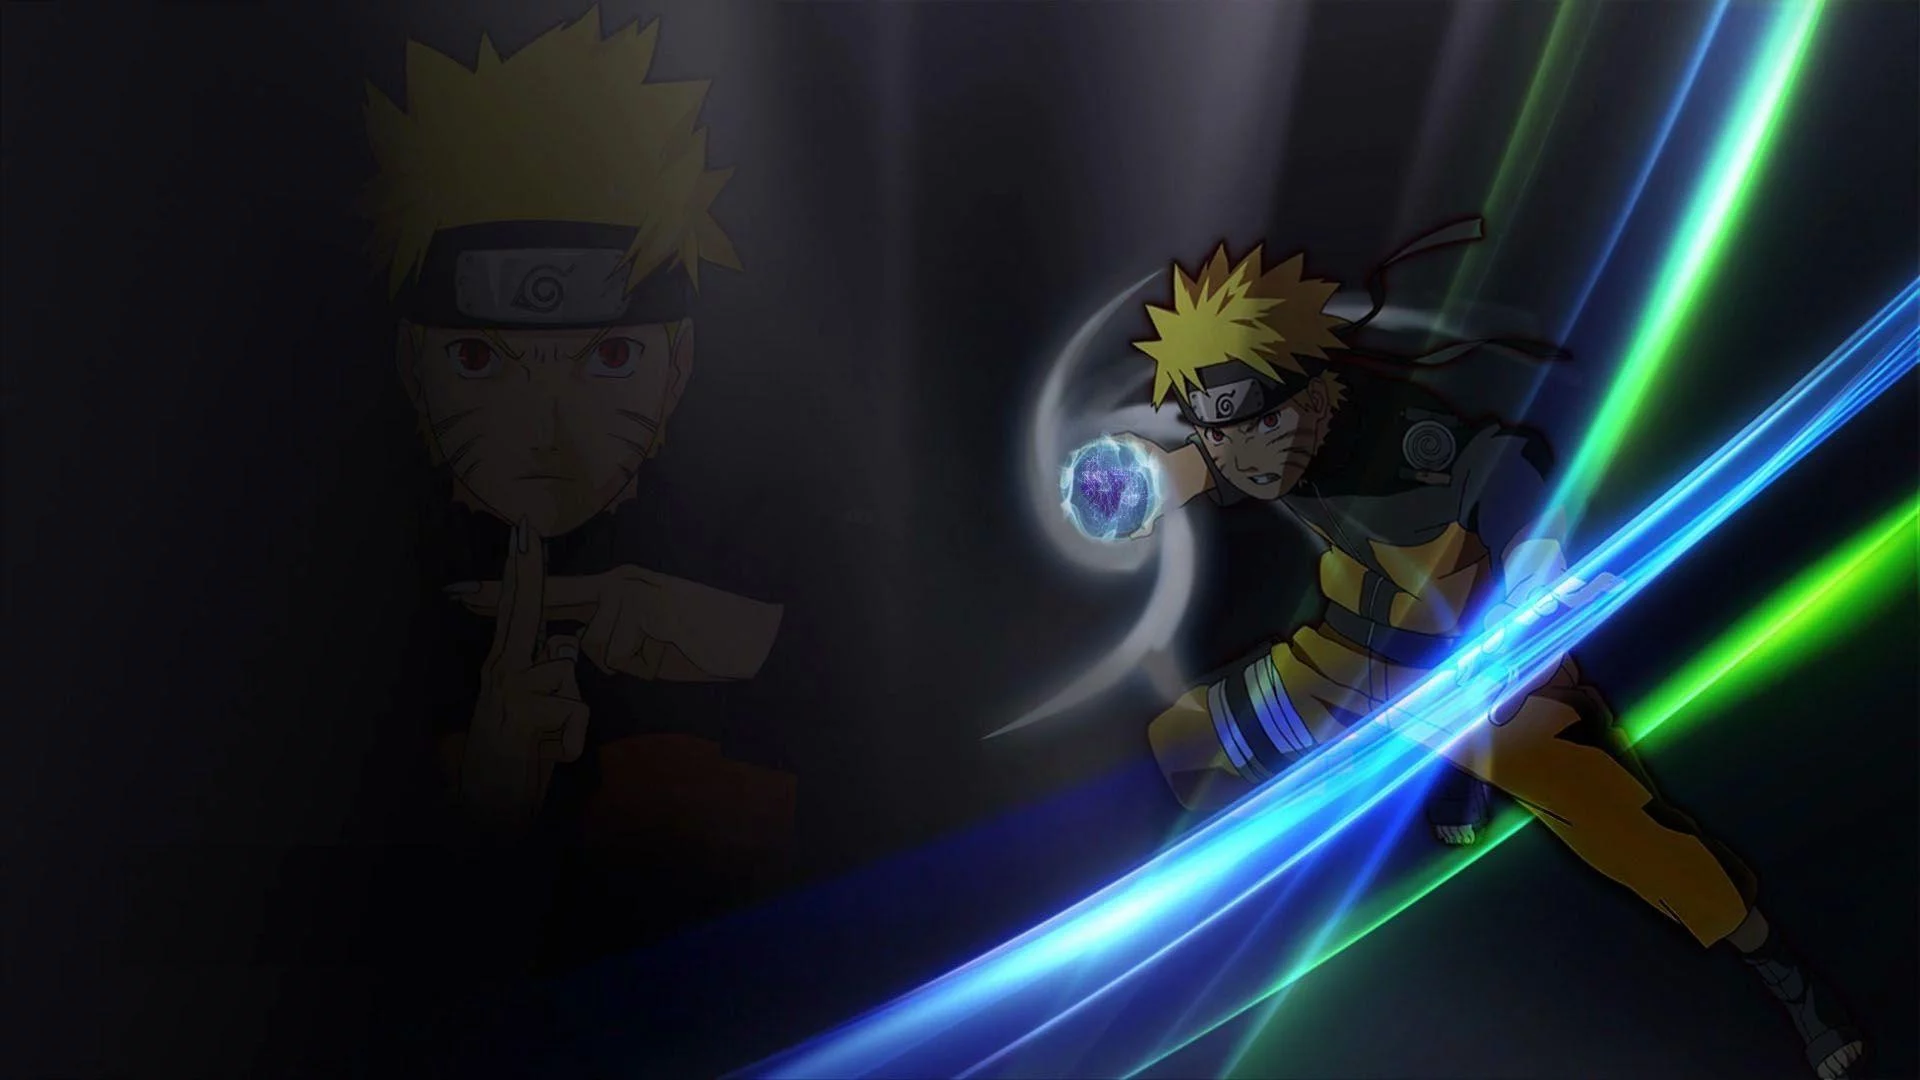 Free Download World Of Warcraft Wallpapers Naruto 1920x1080 Page 10962 (1920 x 1080)